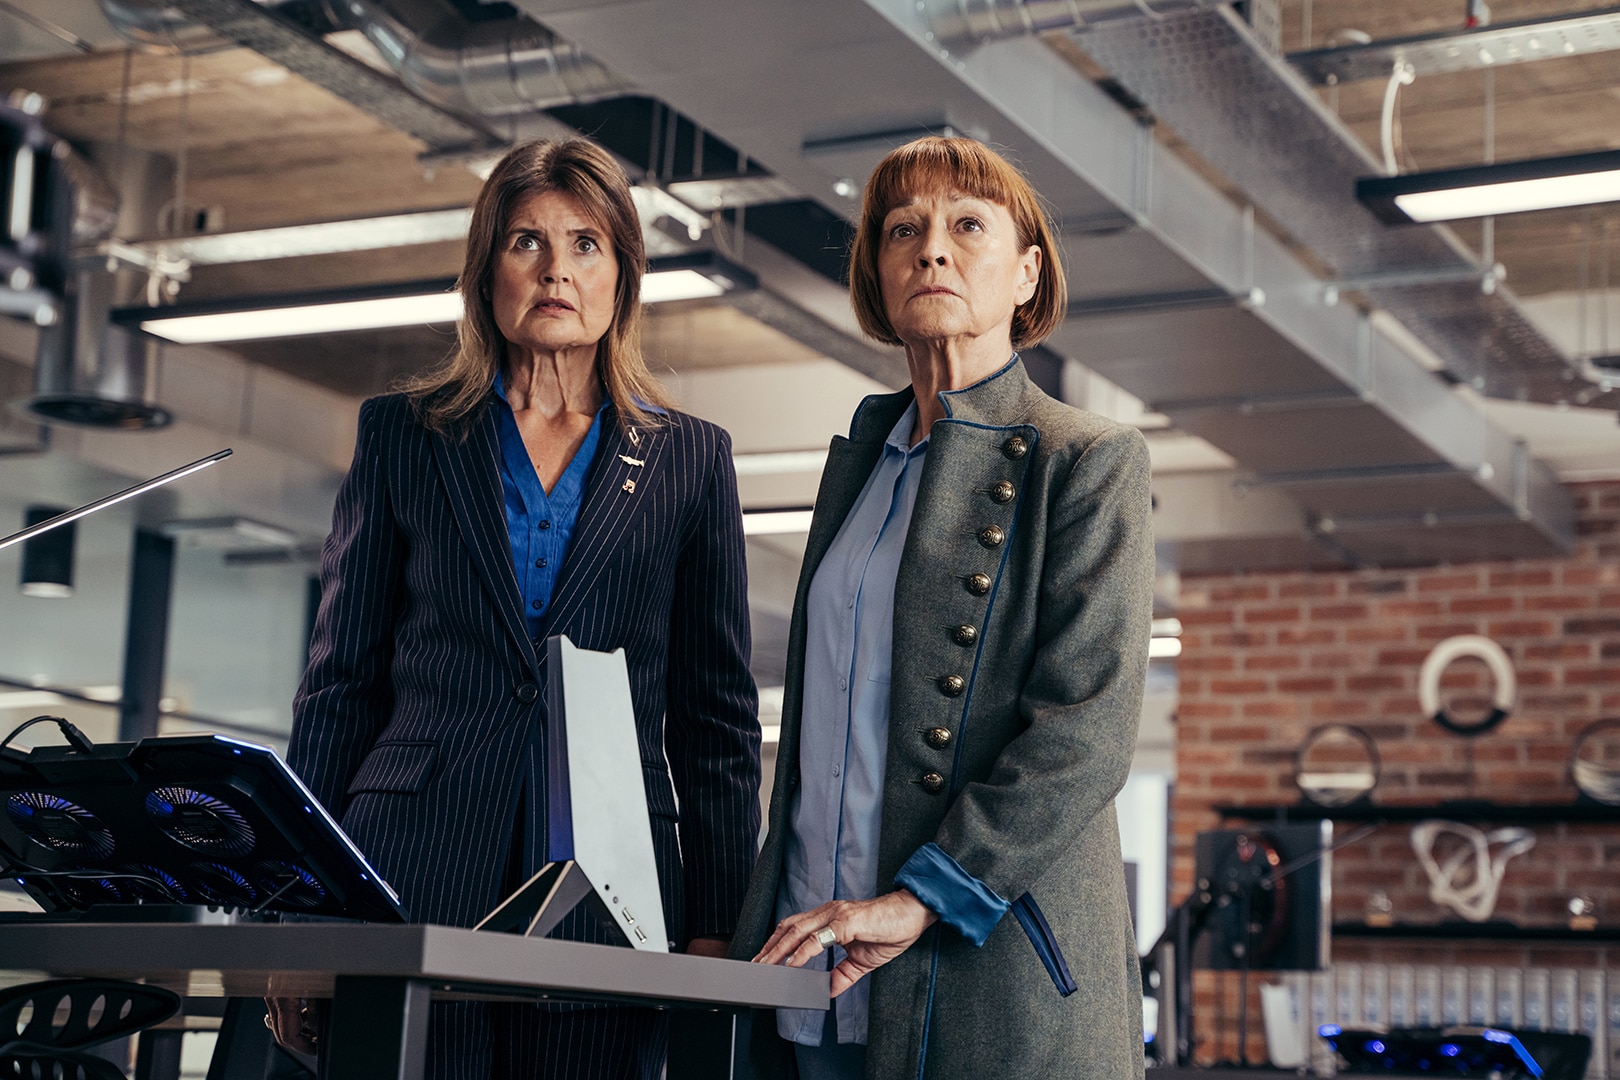 Sophie Aldred as Ace and Janet Fielding as Tegan in 'The Power of the Doctor'.